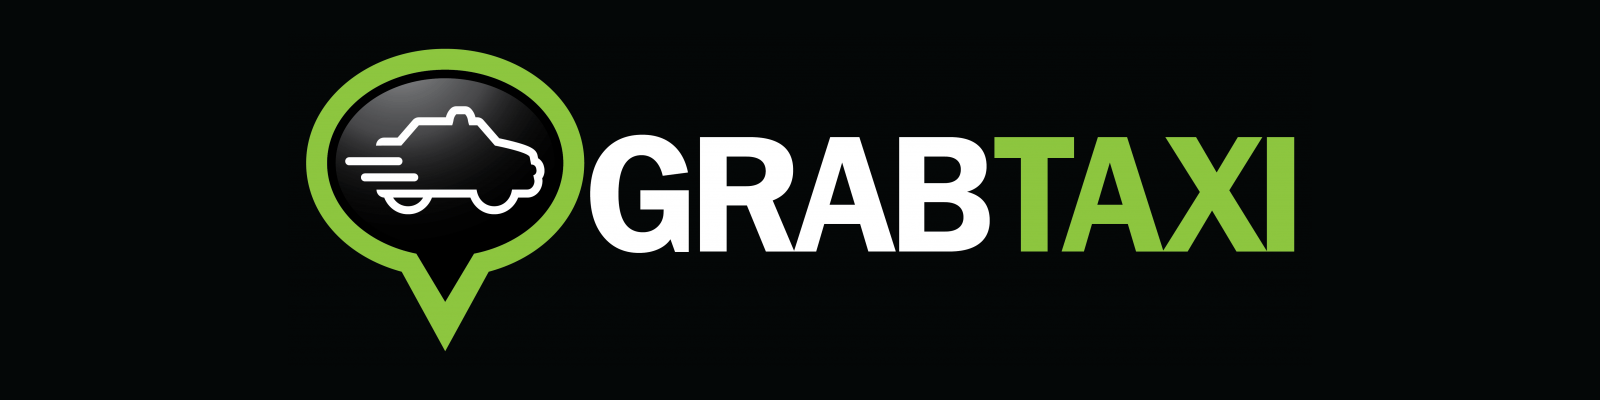 Grab App Logo - How Much Does An App Like Grab Taxi Cost?